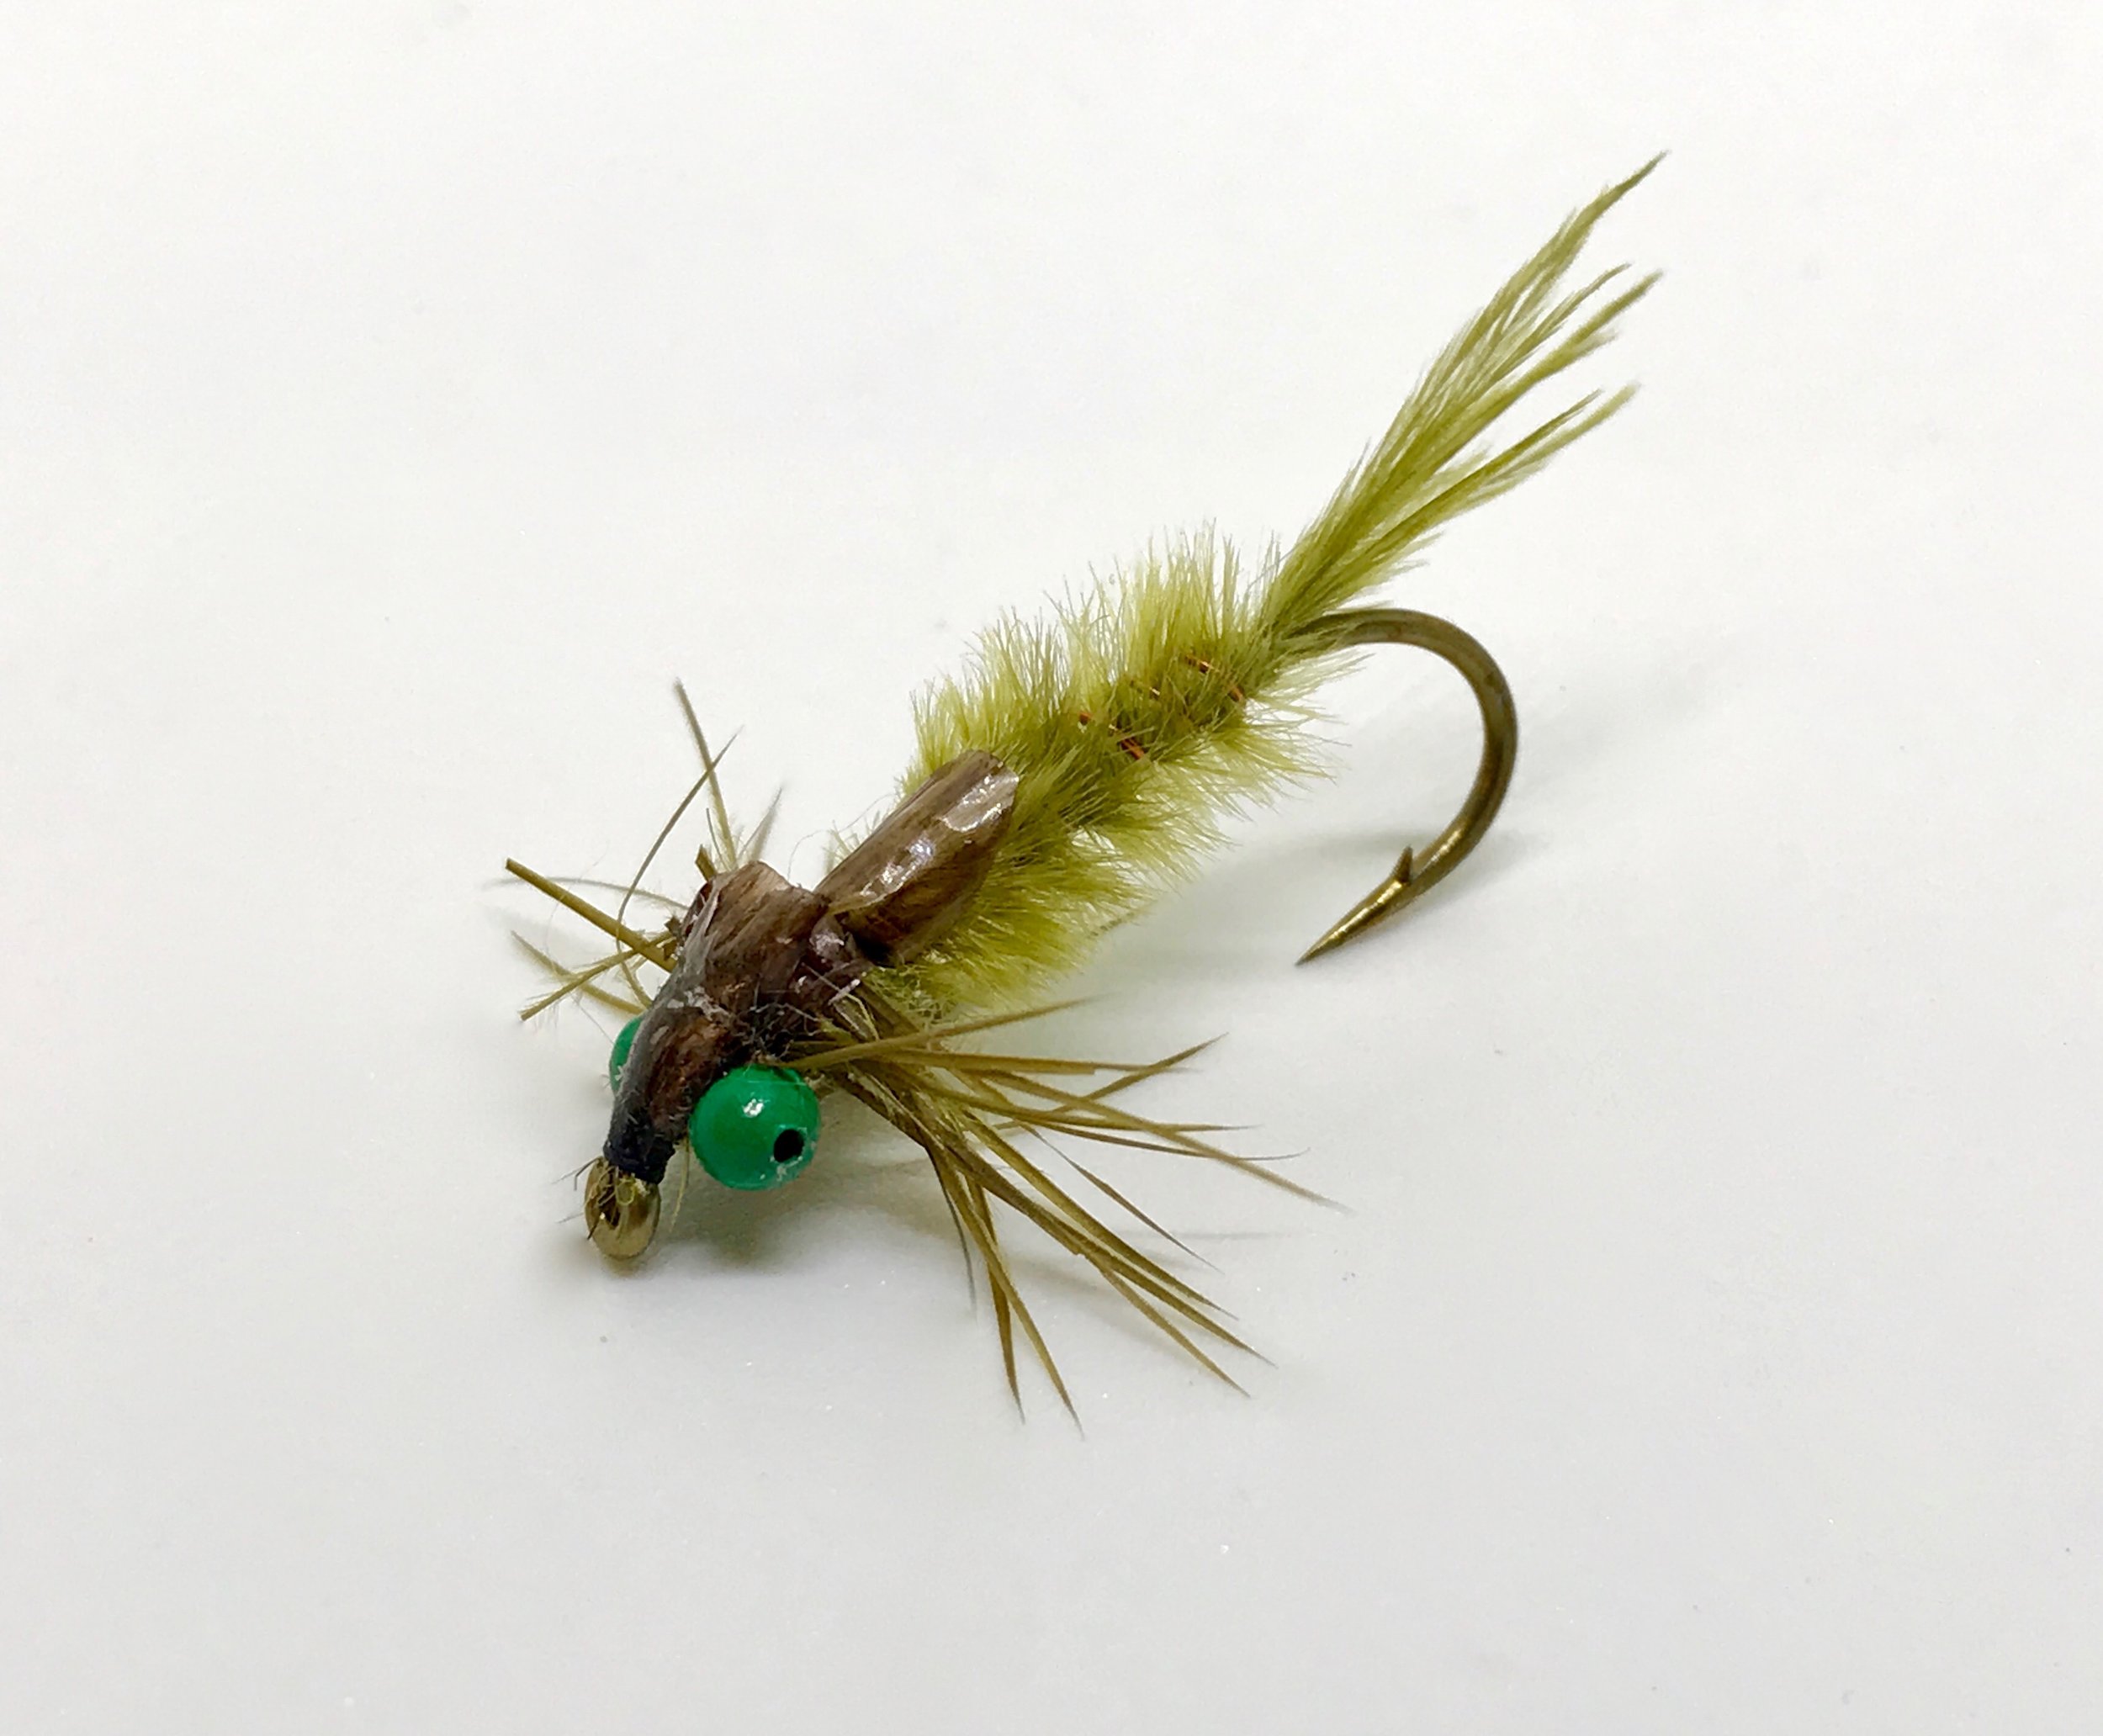 Trout Bluegill Great Fly Fishing Wet Pattern for Lakes Bass Snake River Fly Balanced Leech Blue Pill